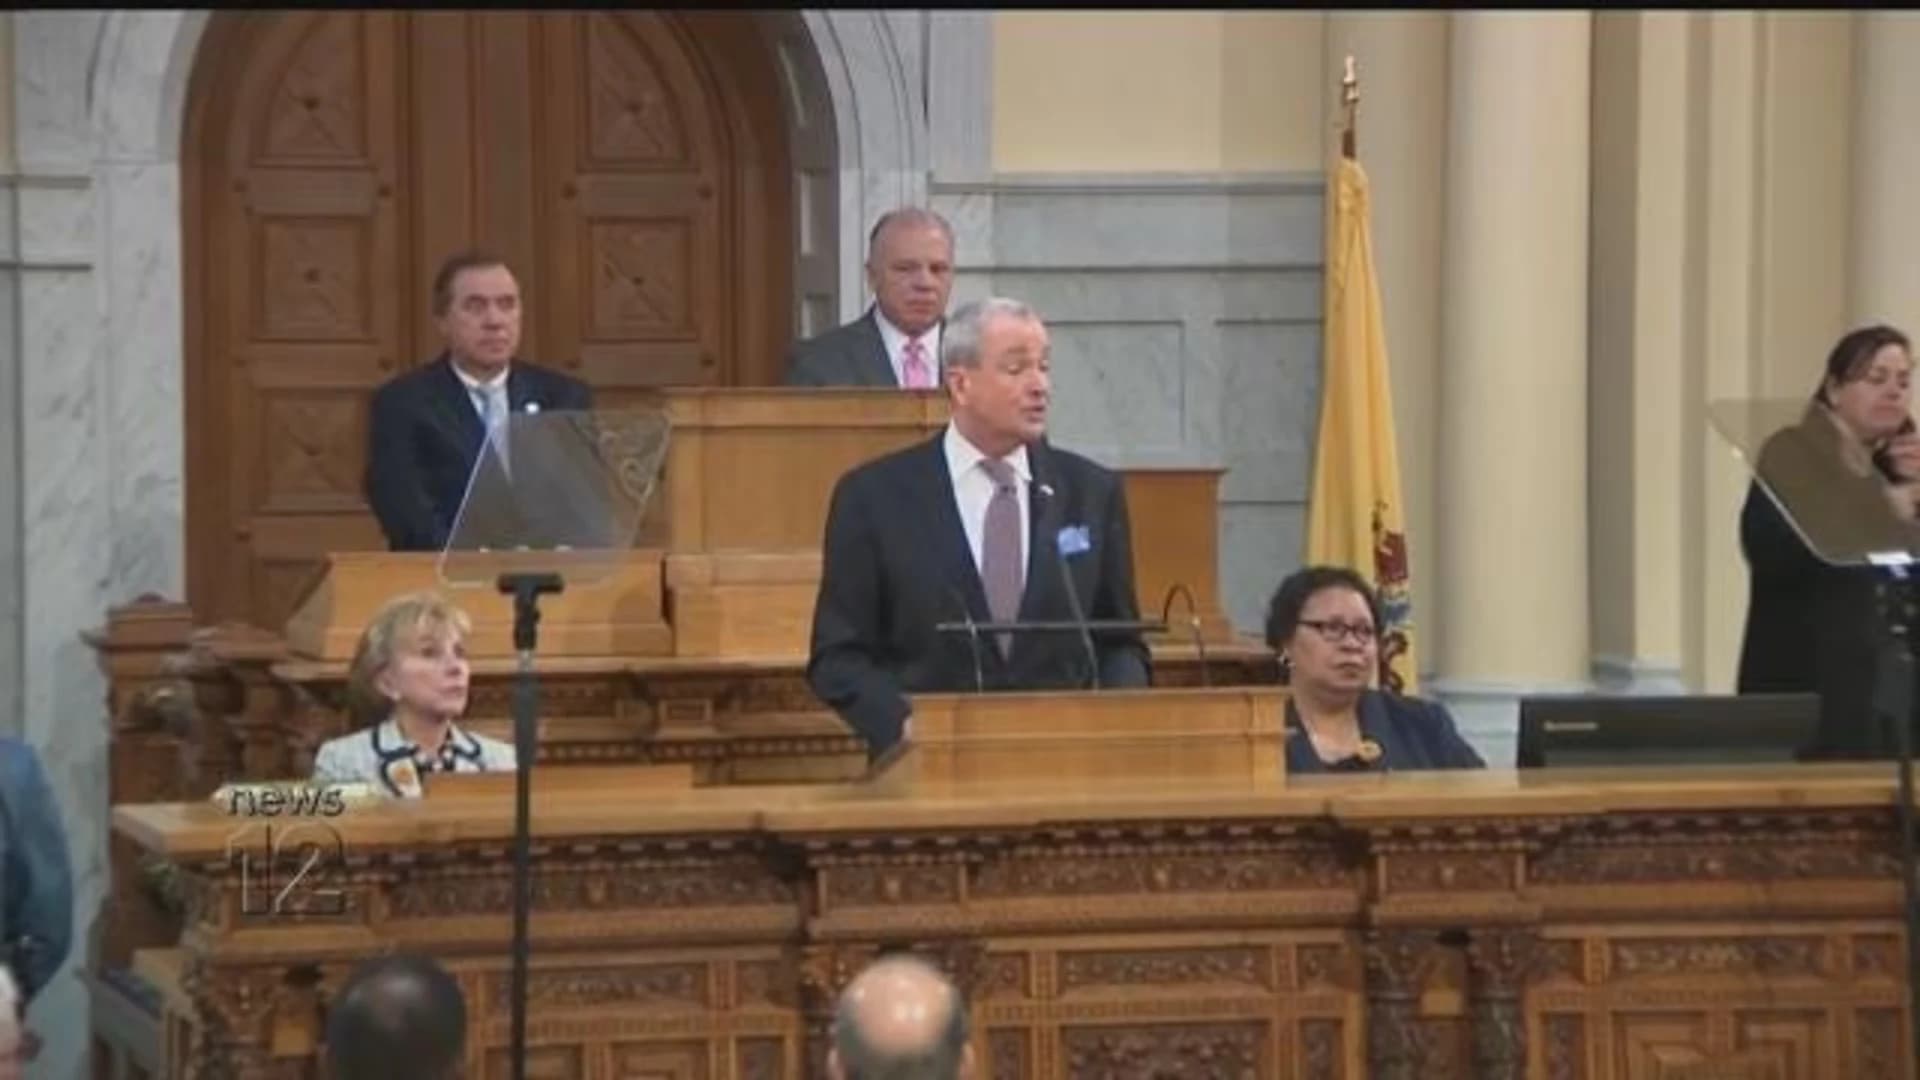 Gov. Murphy to deliver revised budget address Tuesday at 10 a.m.